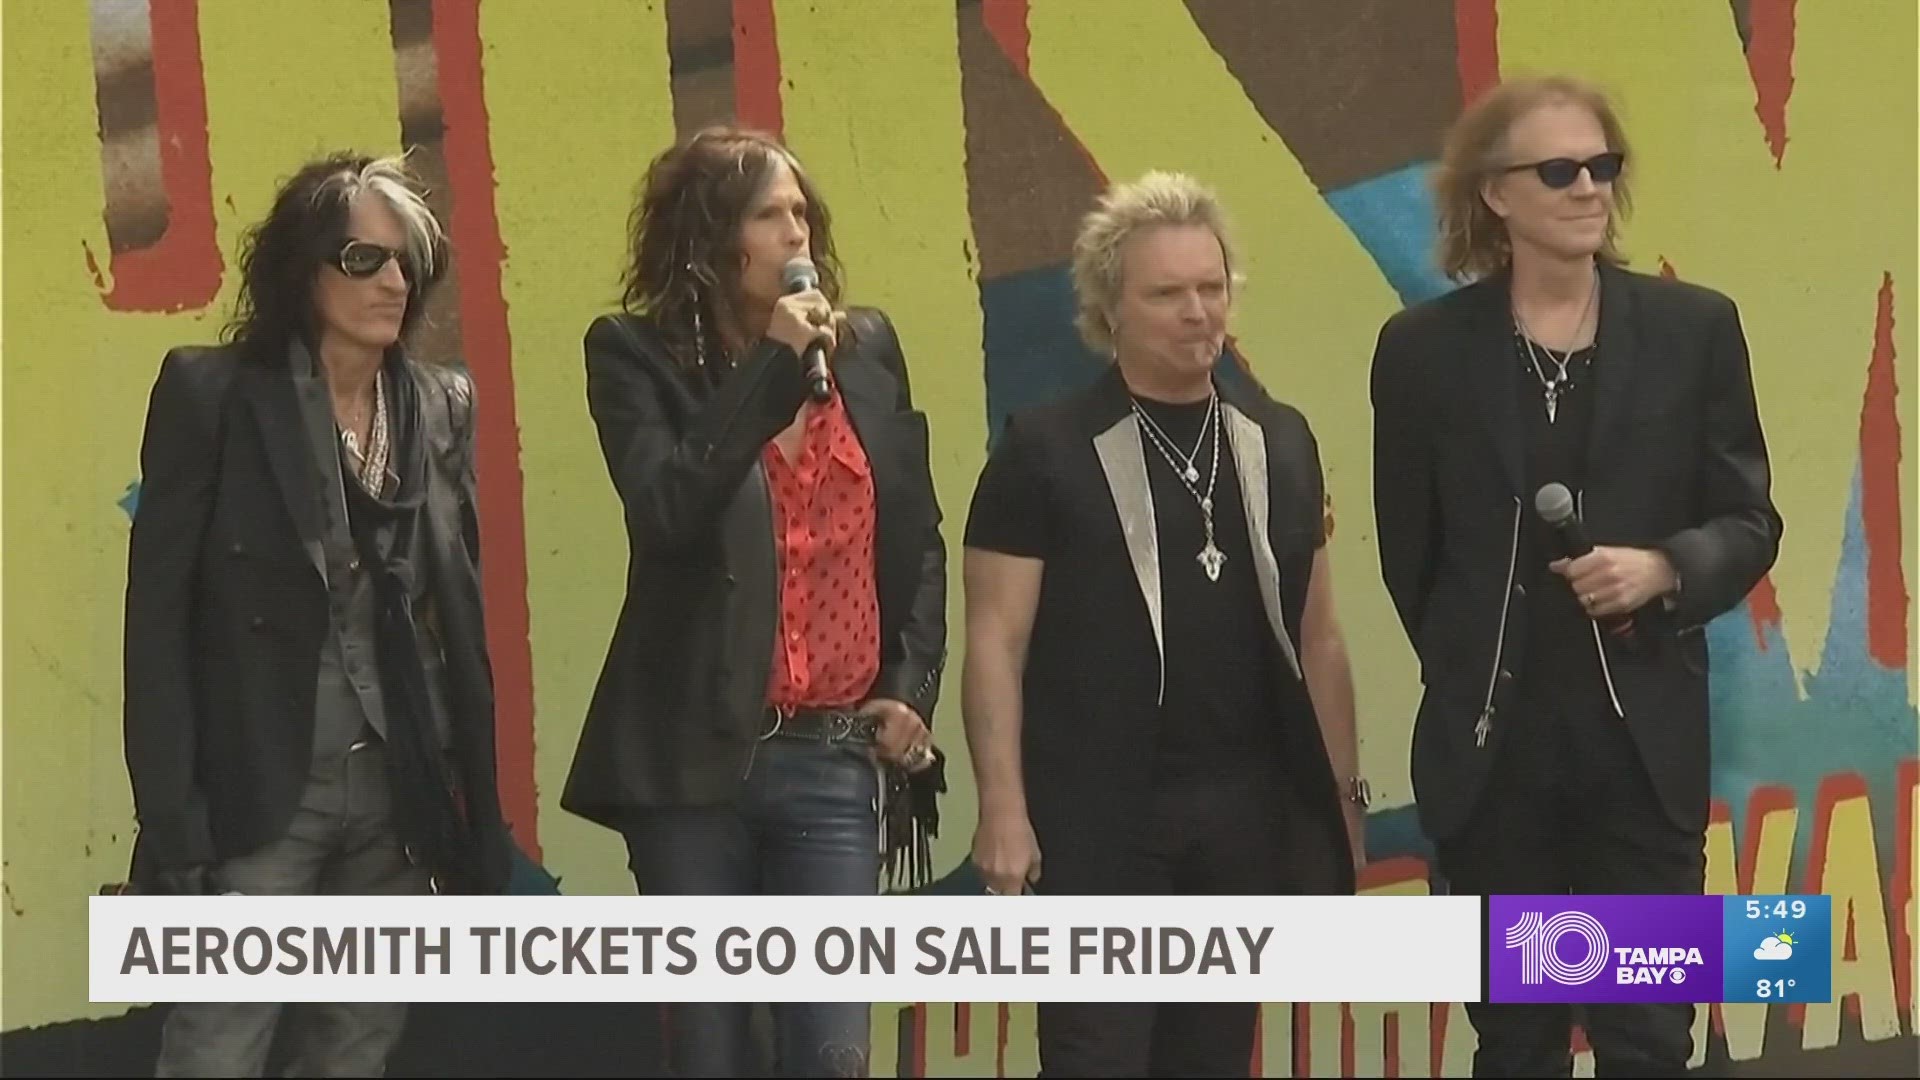 Tickets to Aerosmith's "Peace Out" tour go on sale at 10 a.m. Friday, May 5.